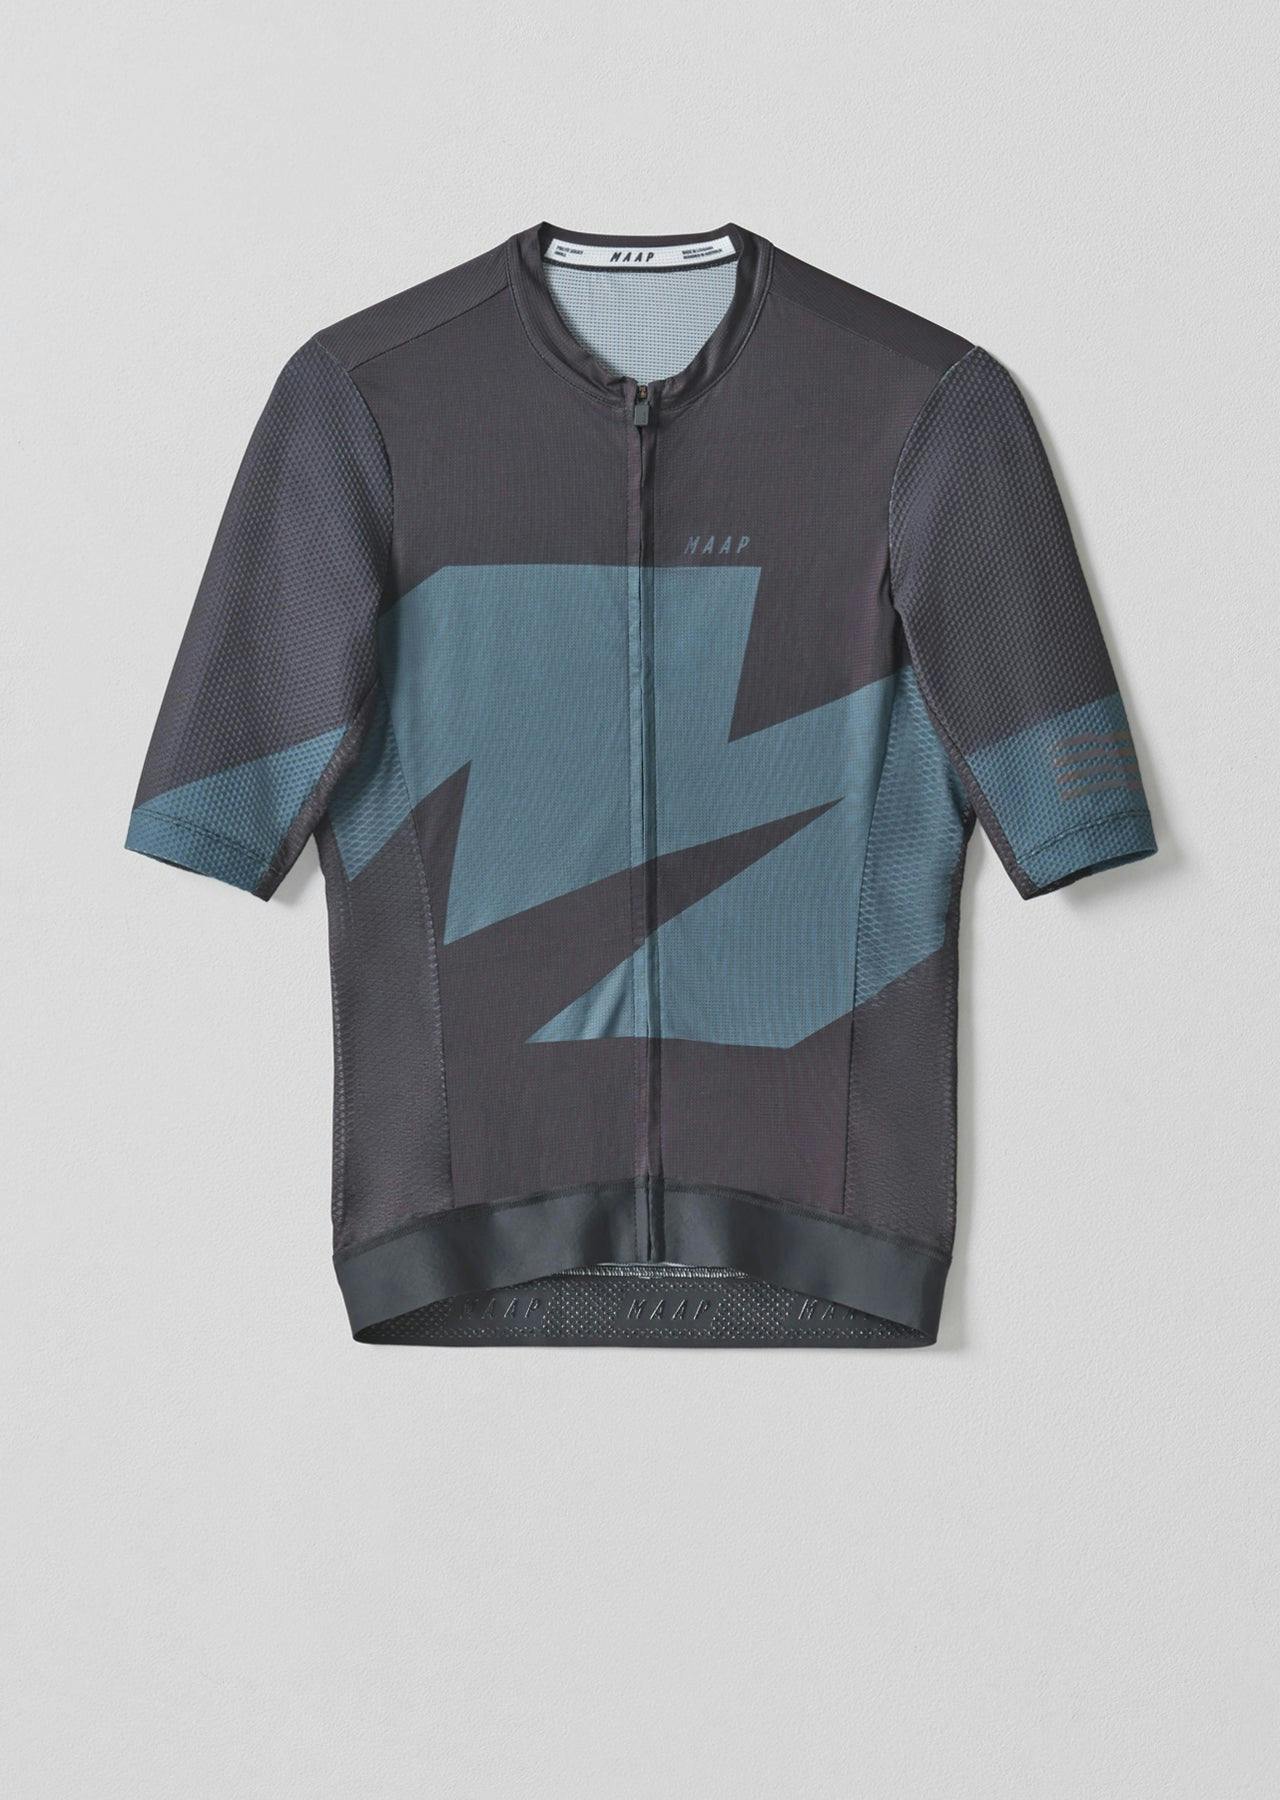 Our Latest Cycling Collections | For Men | MAAP